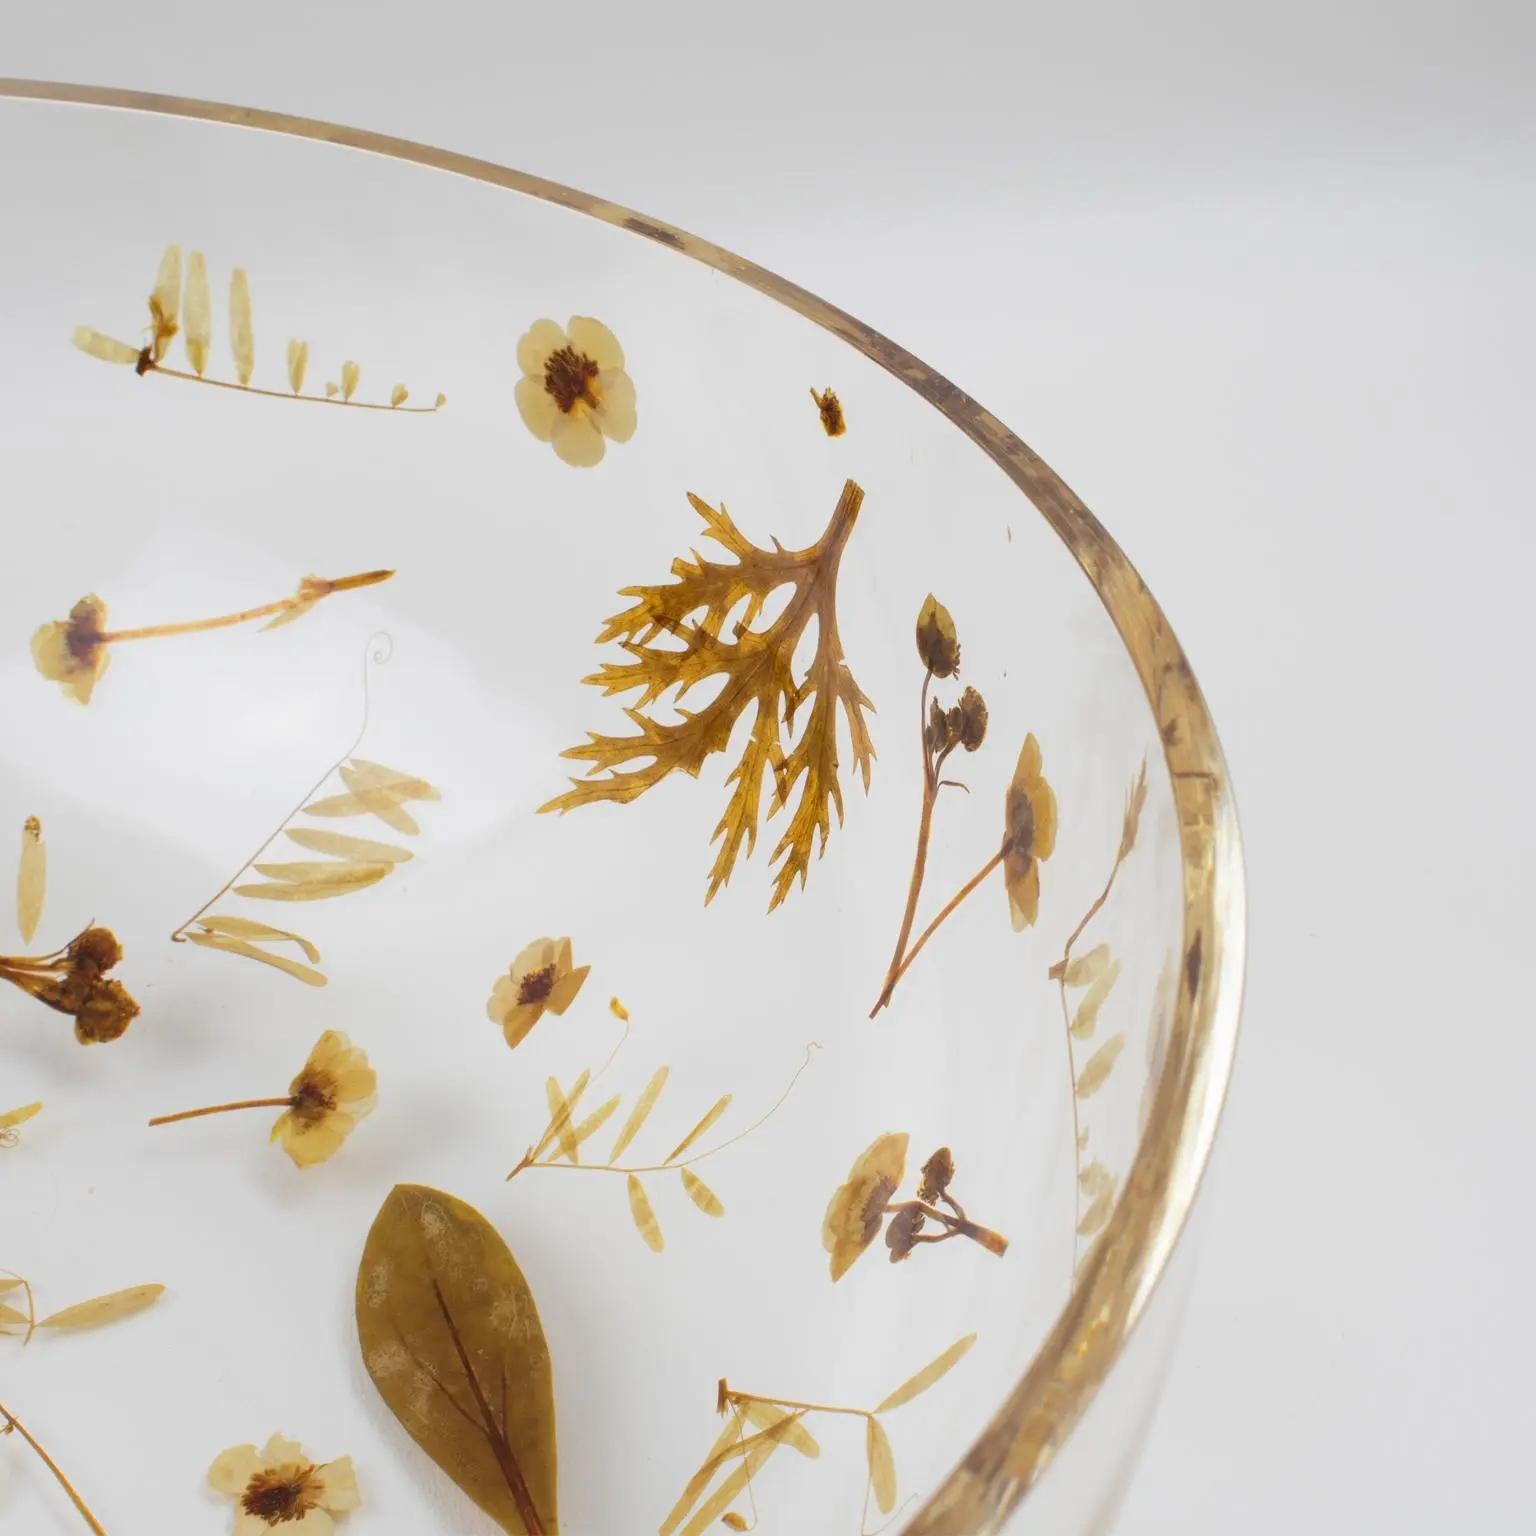 Italian Resin Bowl Centerpiece with Leaves and Flowers Inclusions, Italy 1970s For Sale